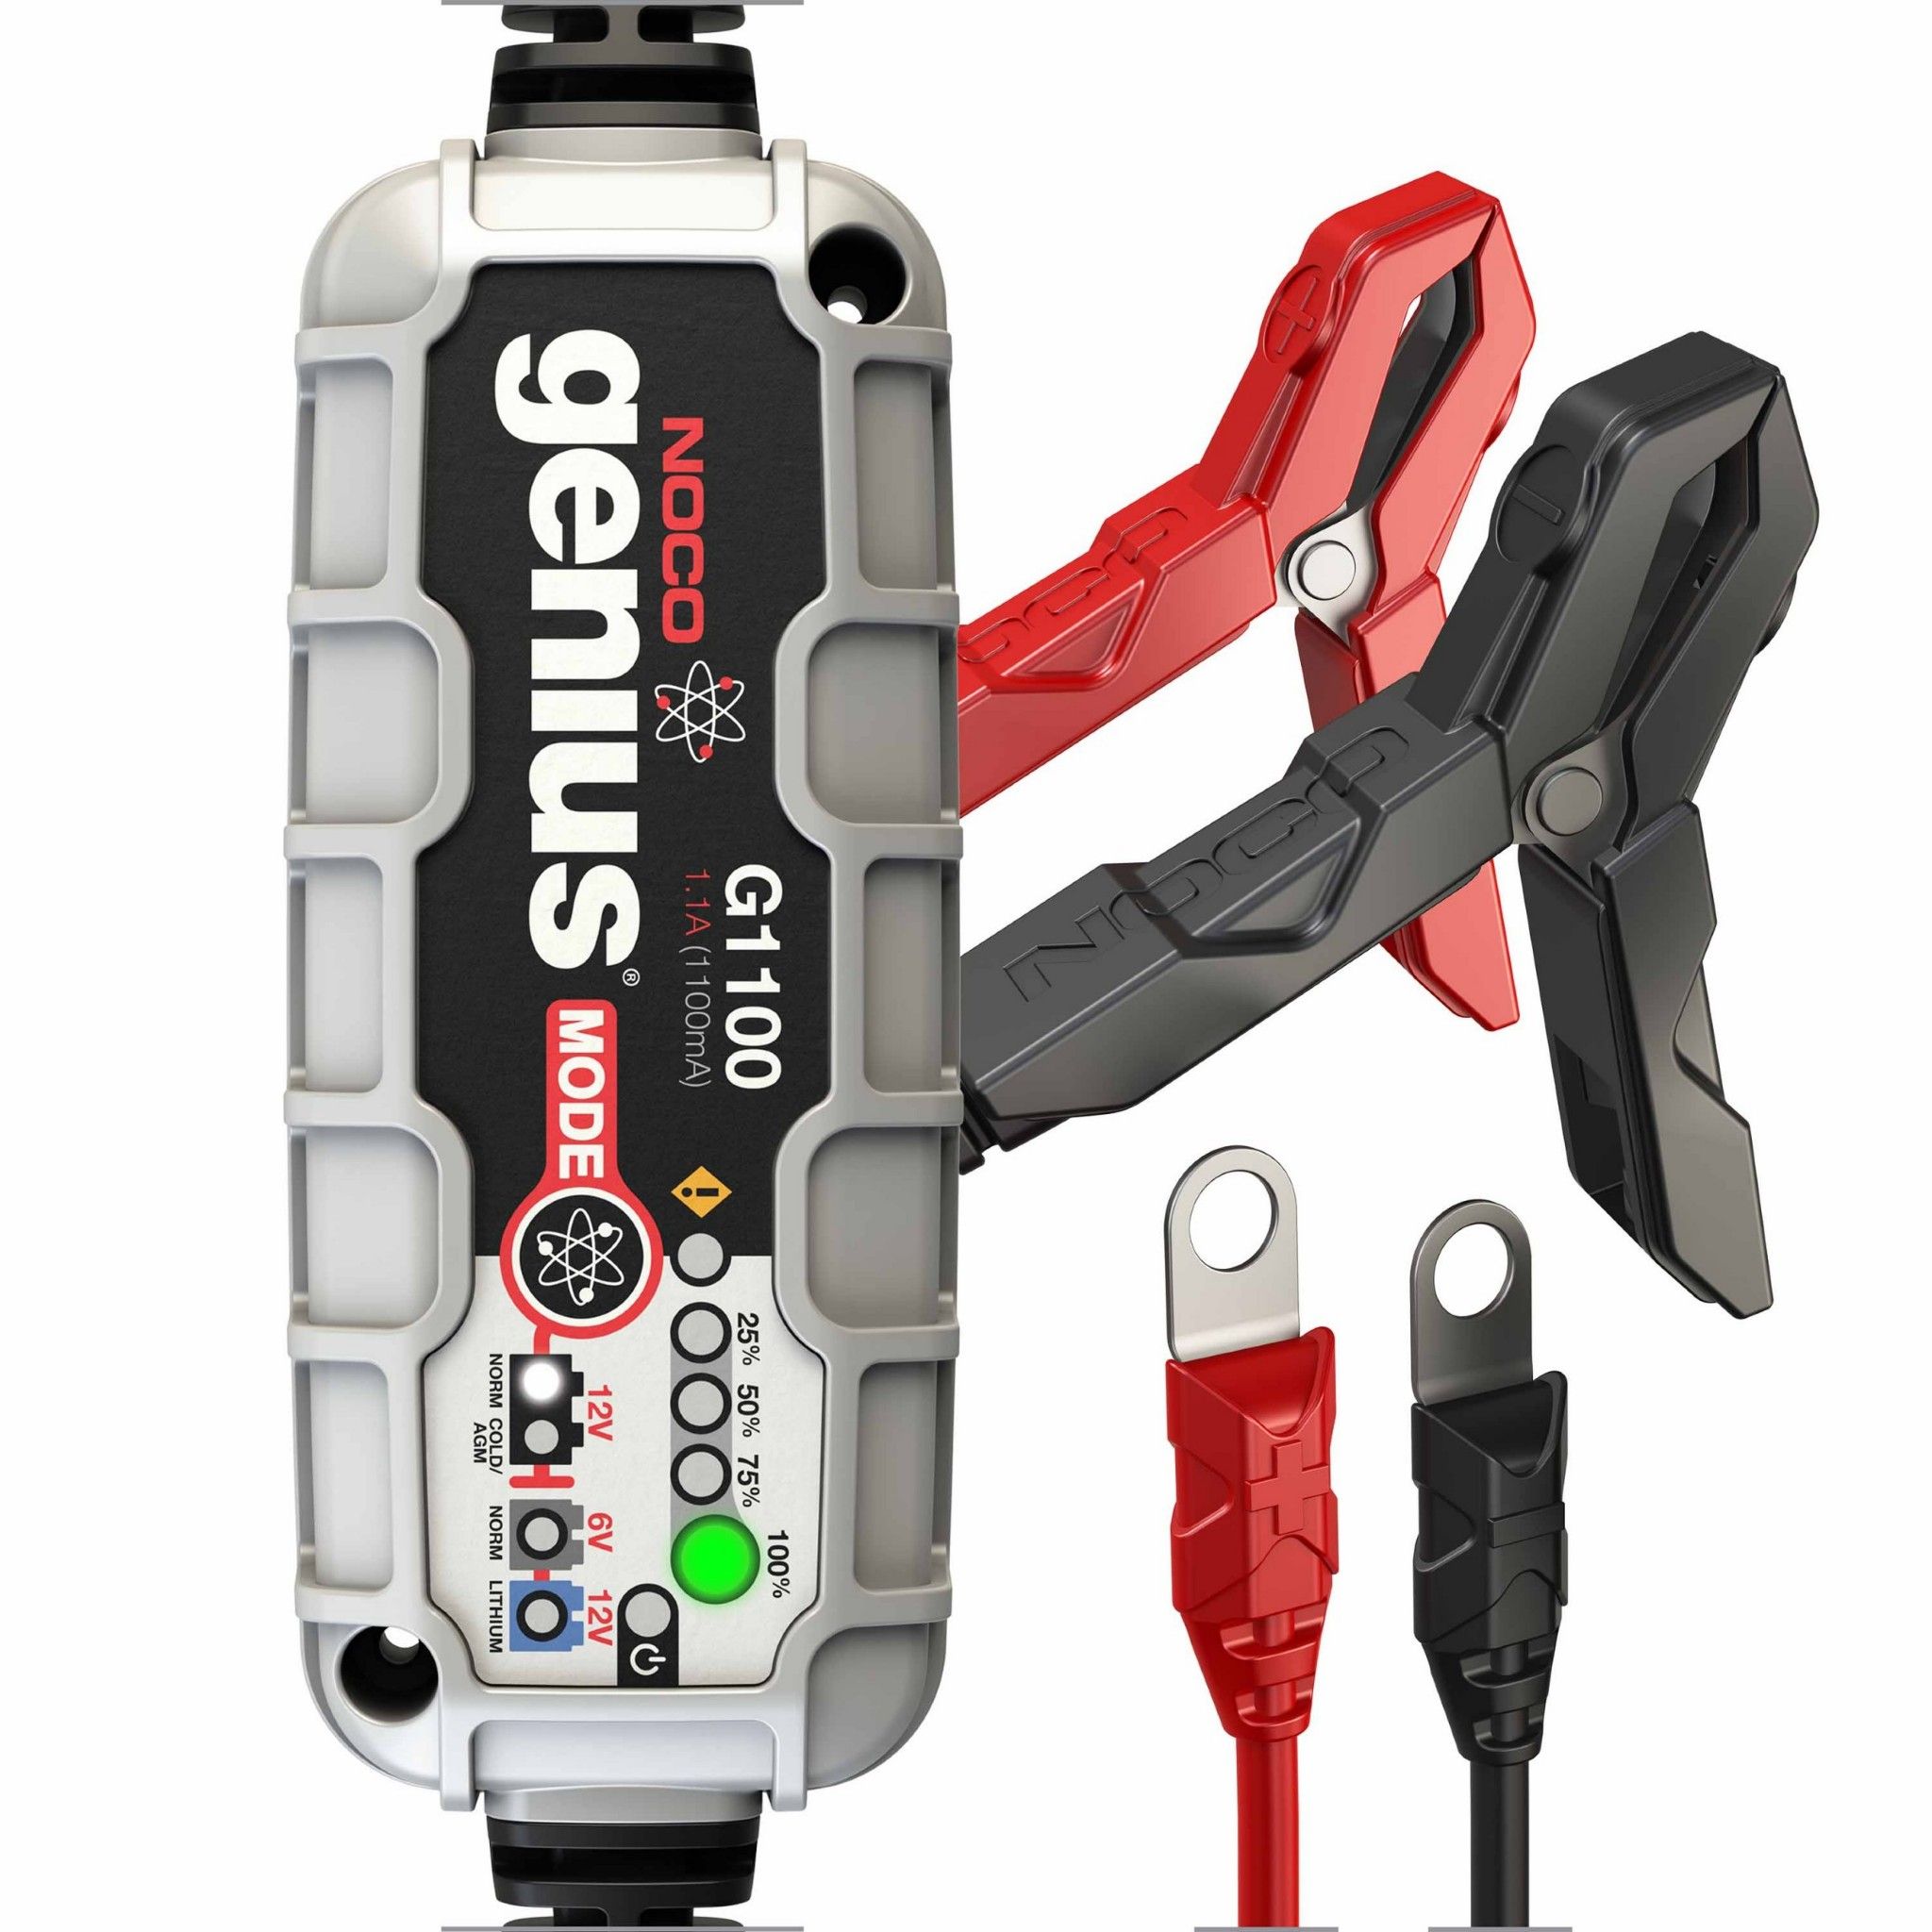 https://www.elitemotorcycleservices.co.uk/Graphics/Std_Product_Images/noco-genius-g1100uk-6-12-volt-battery-charger-lithium-compatible-267-p.jpg